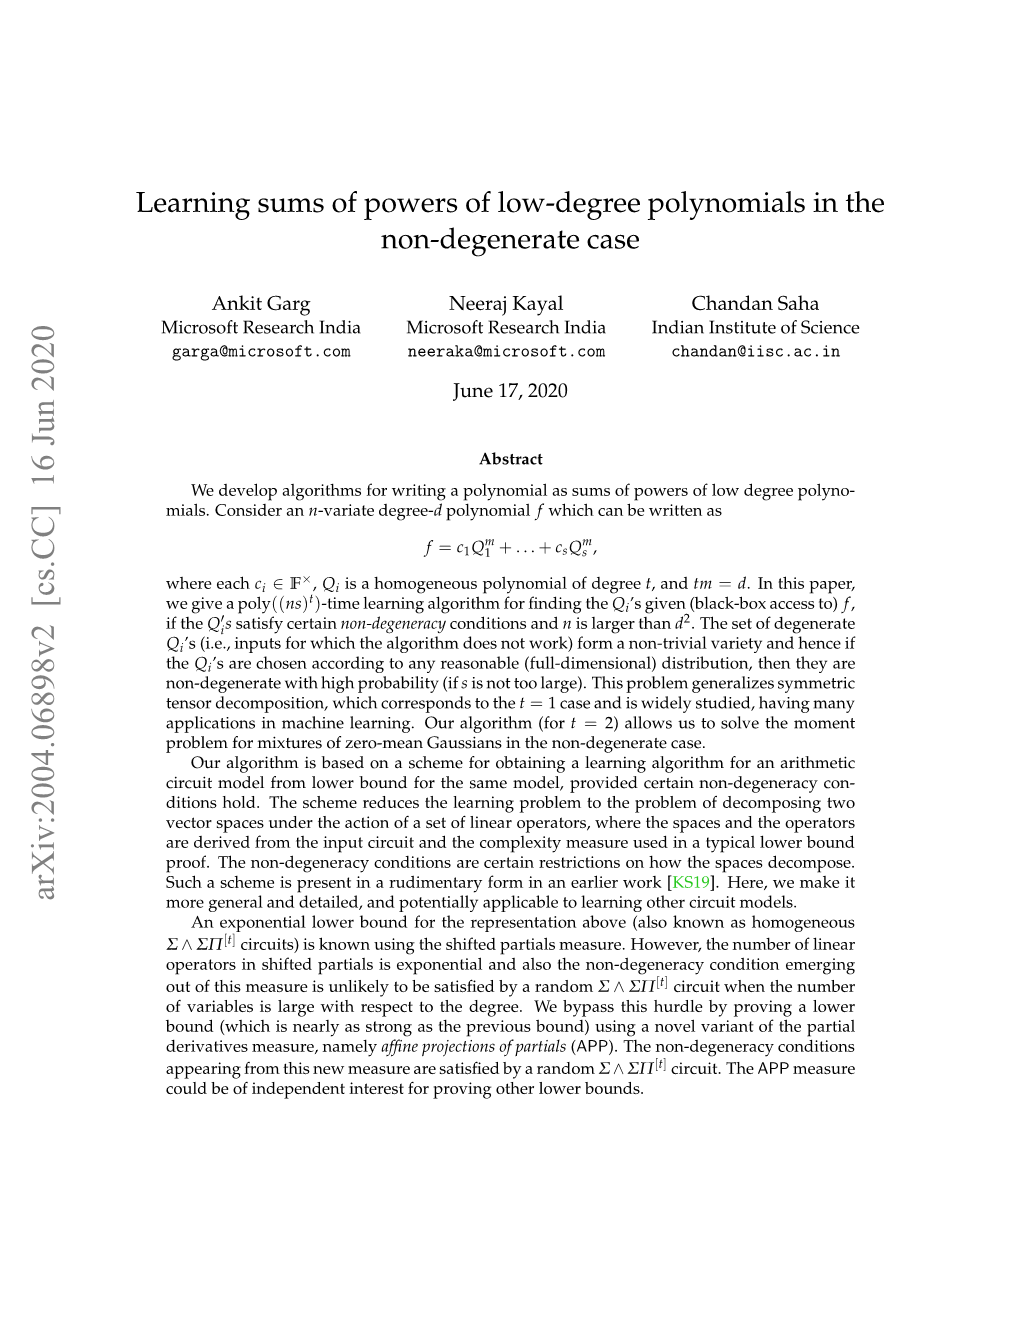 Learning Sums of Powers of Low-Degree Polynomials in the Non